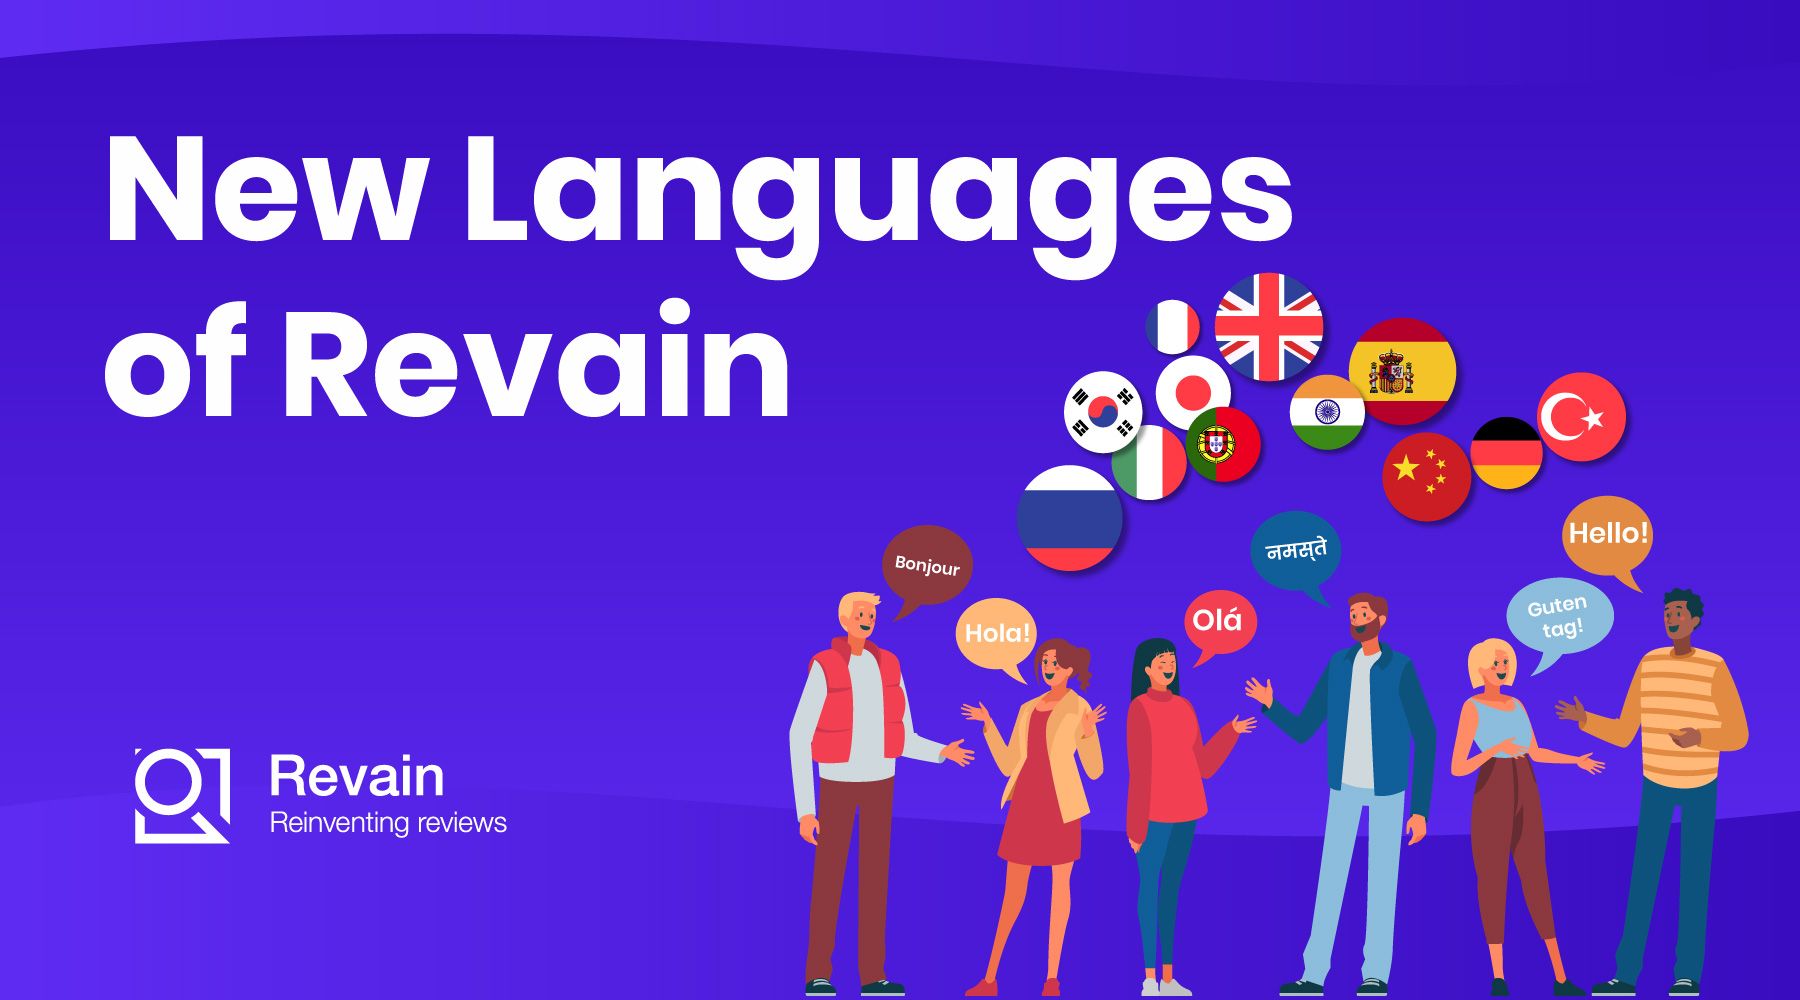 Article New languages of Revain